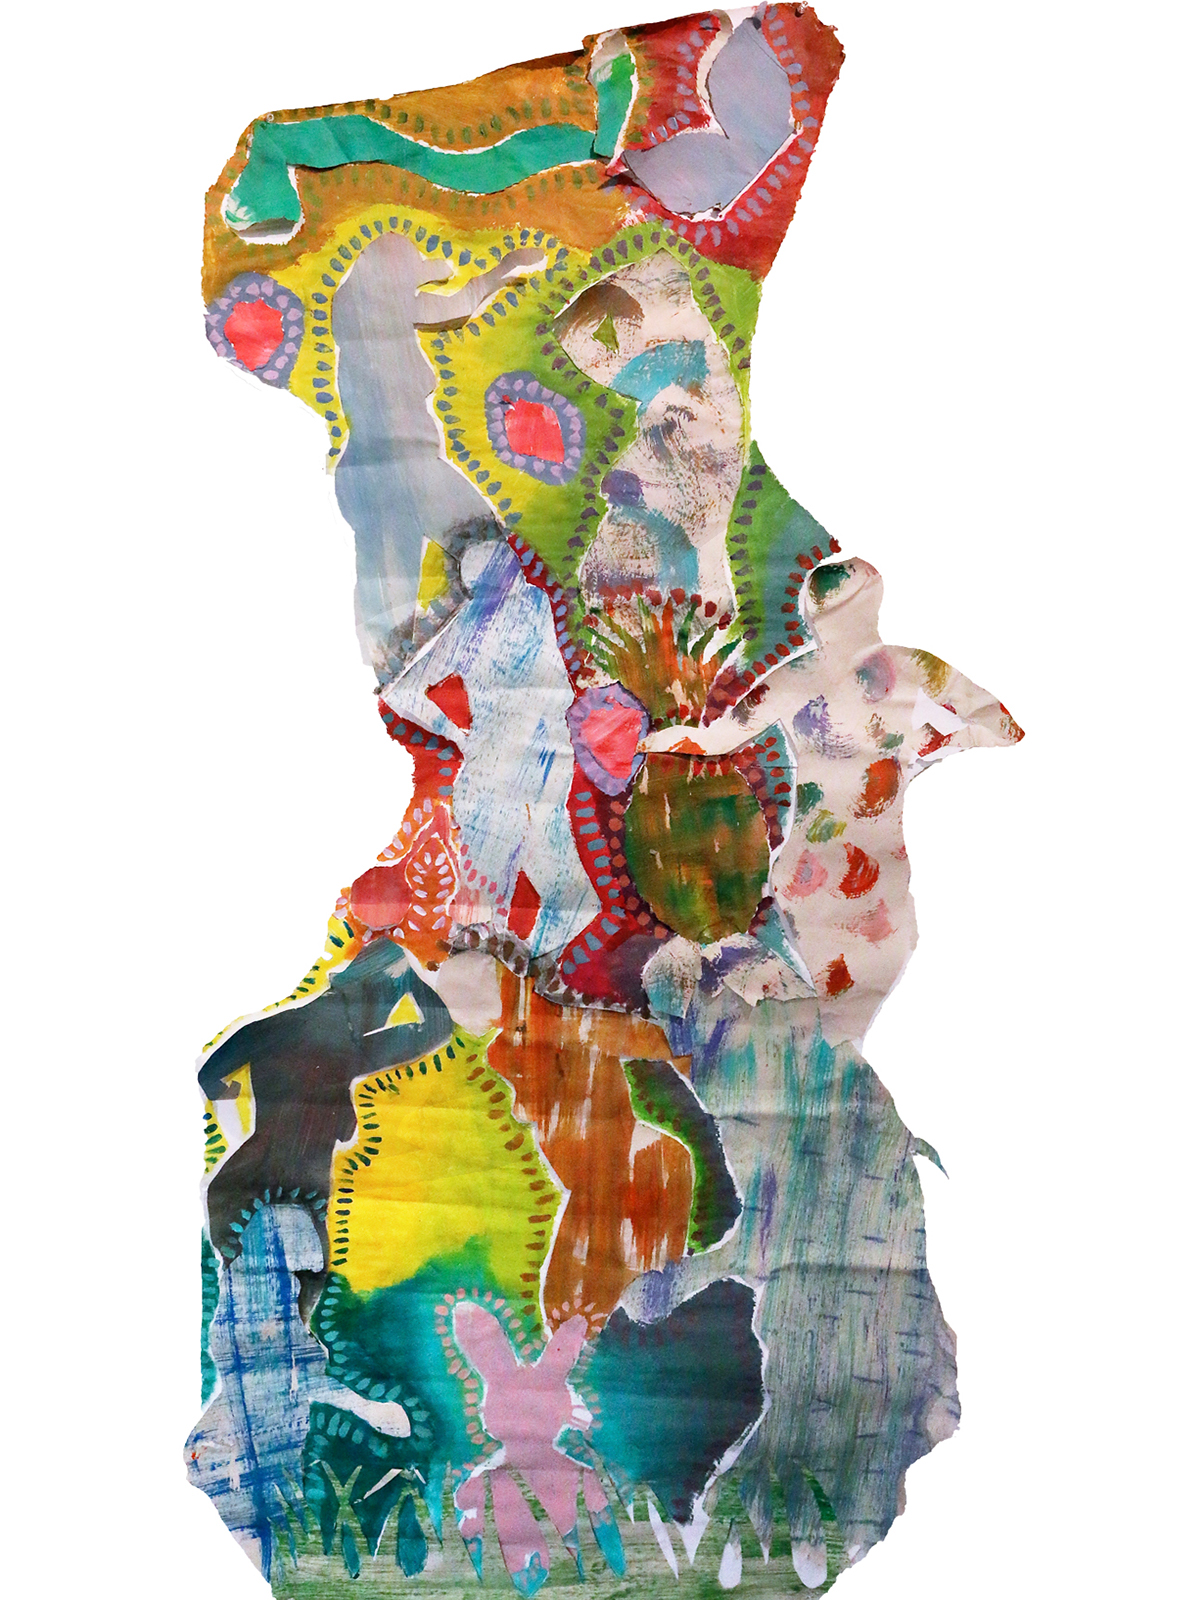 collage shaping acrylic portraits painting   sculptural